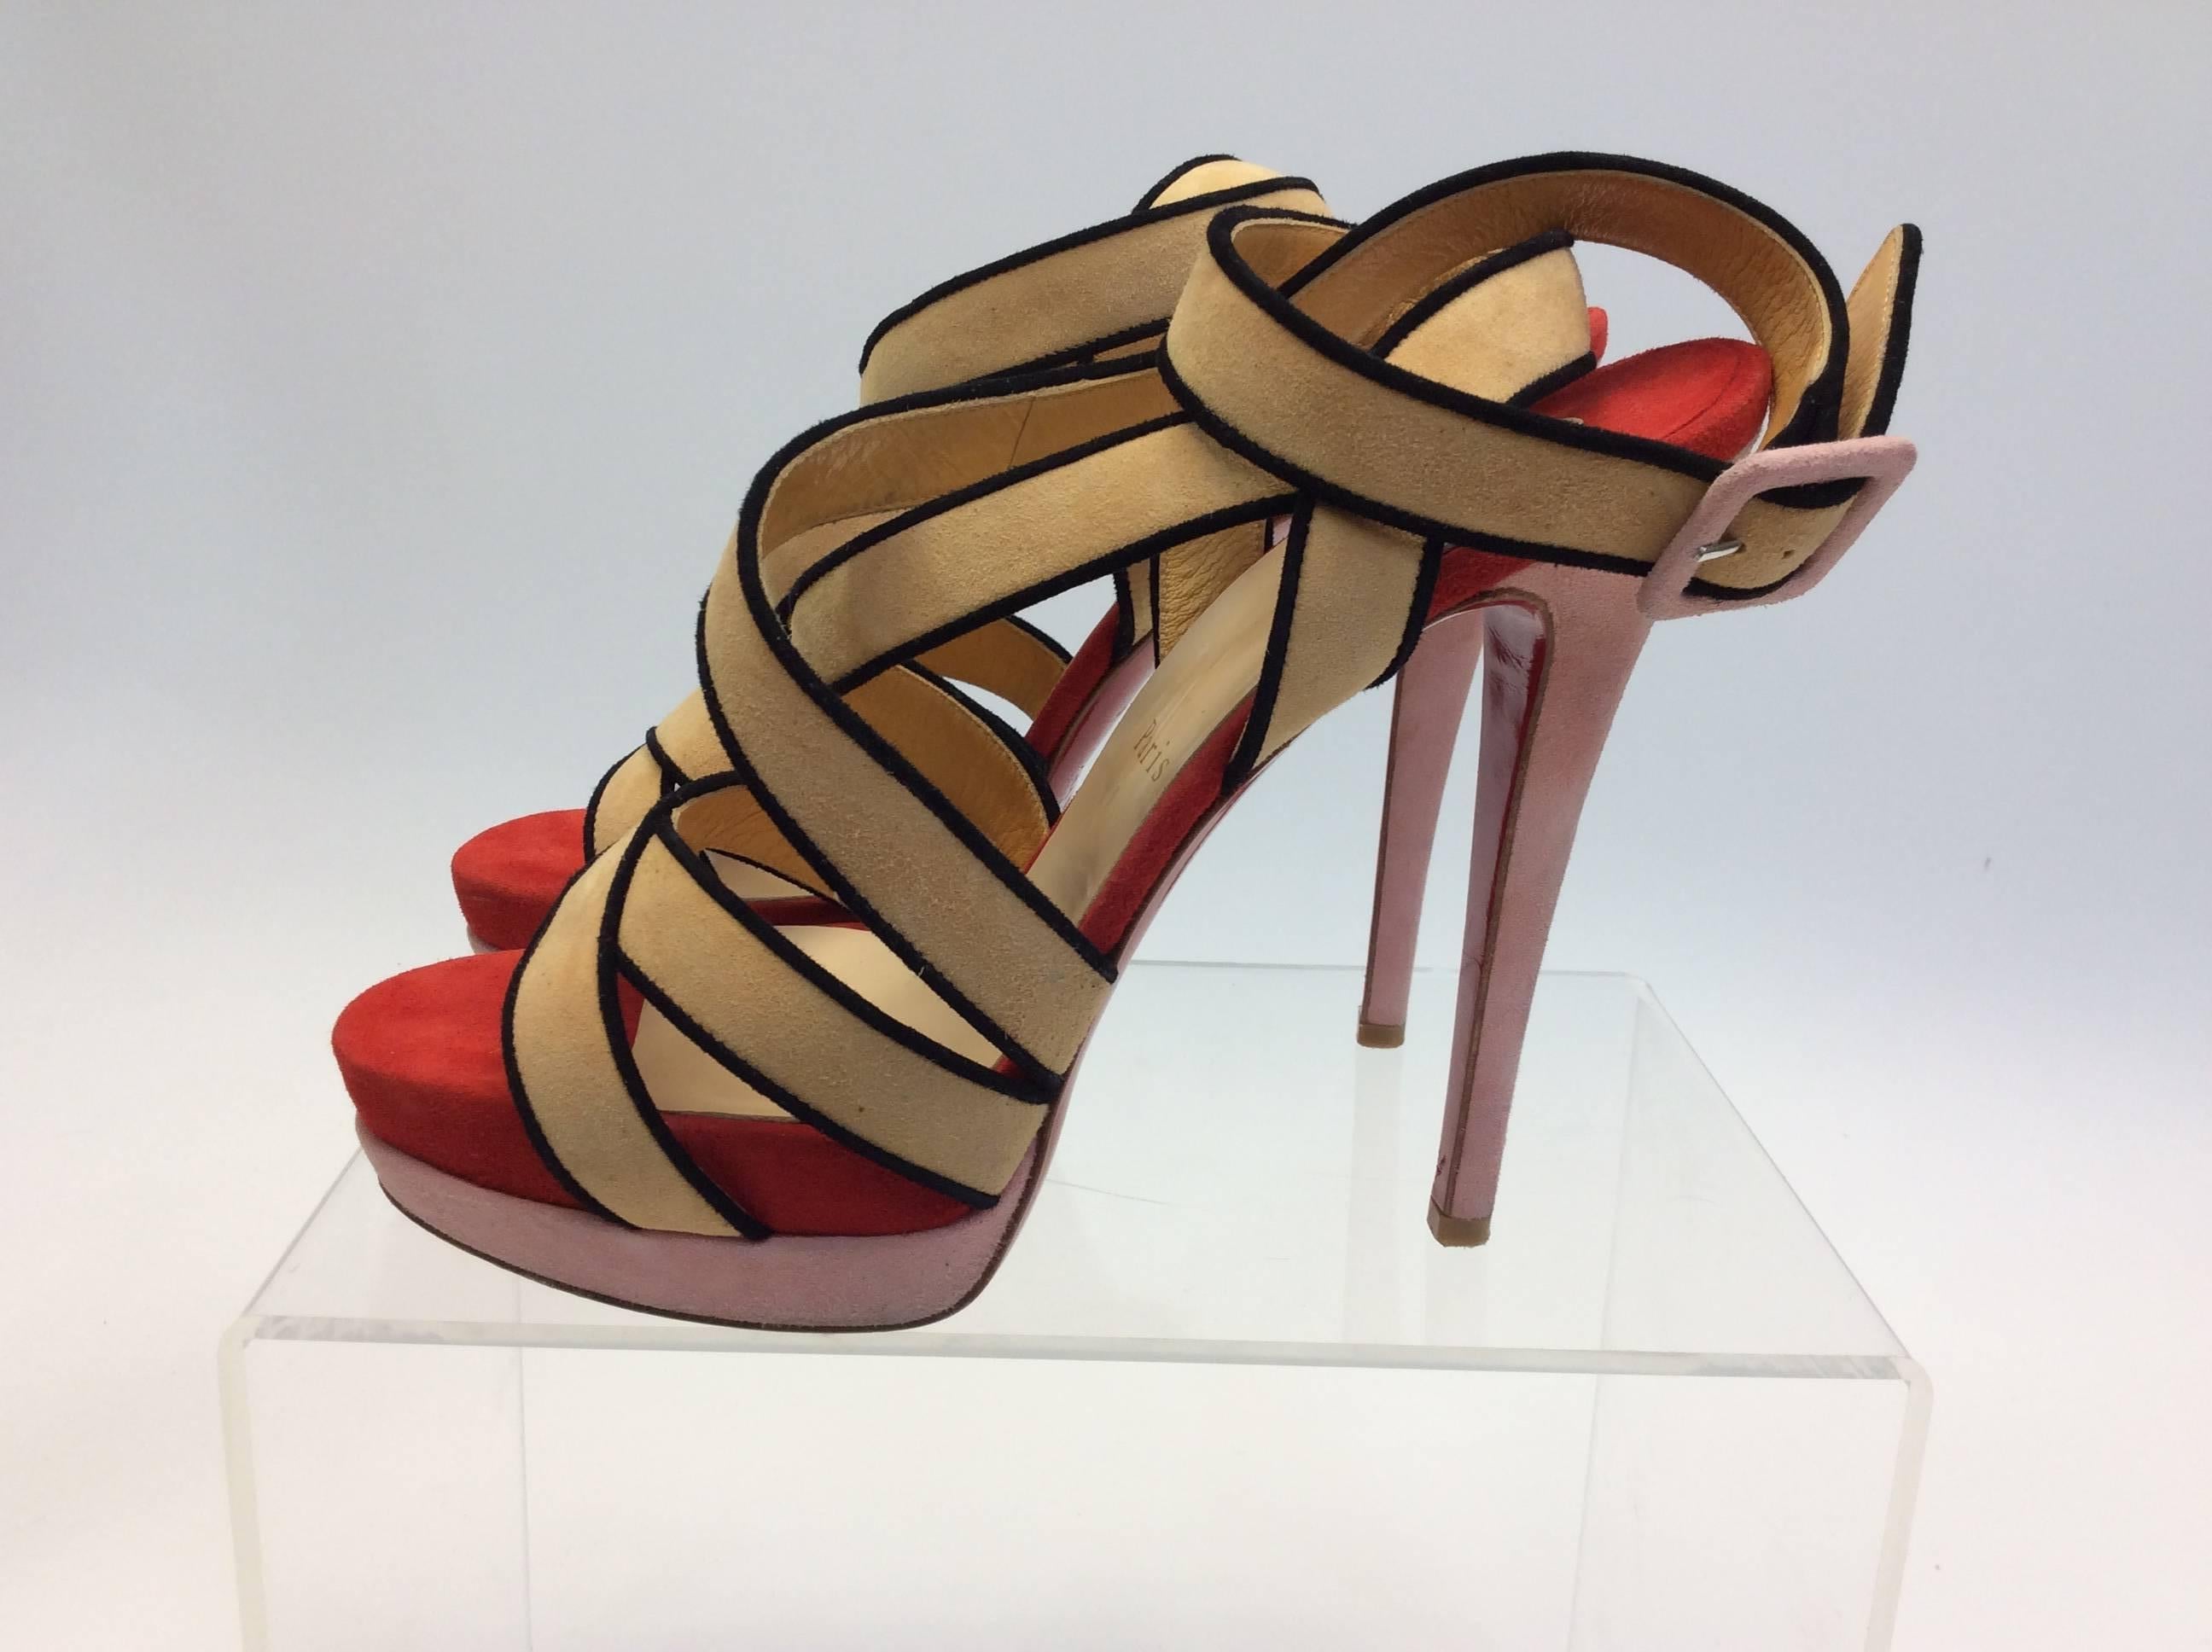 Christian Louboutin Nude, Red, and Pink Suede Sandals
$299
Made in Italy
Size 39
5.5